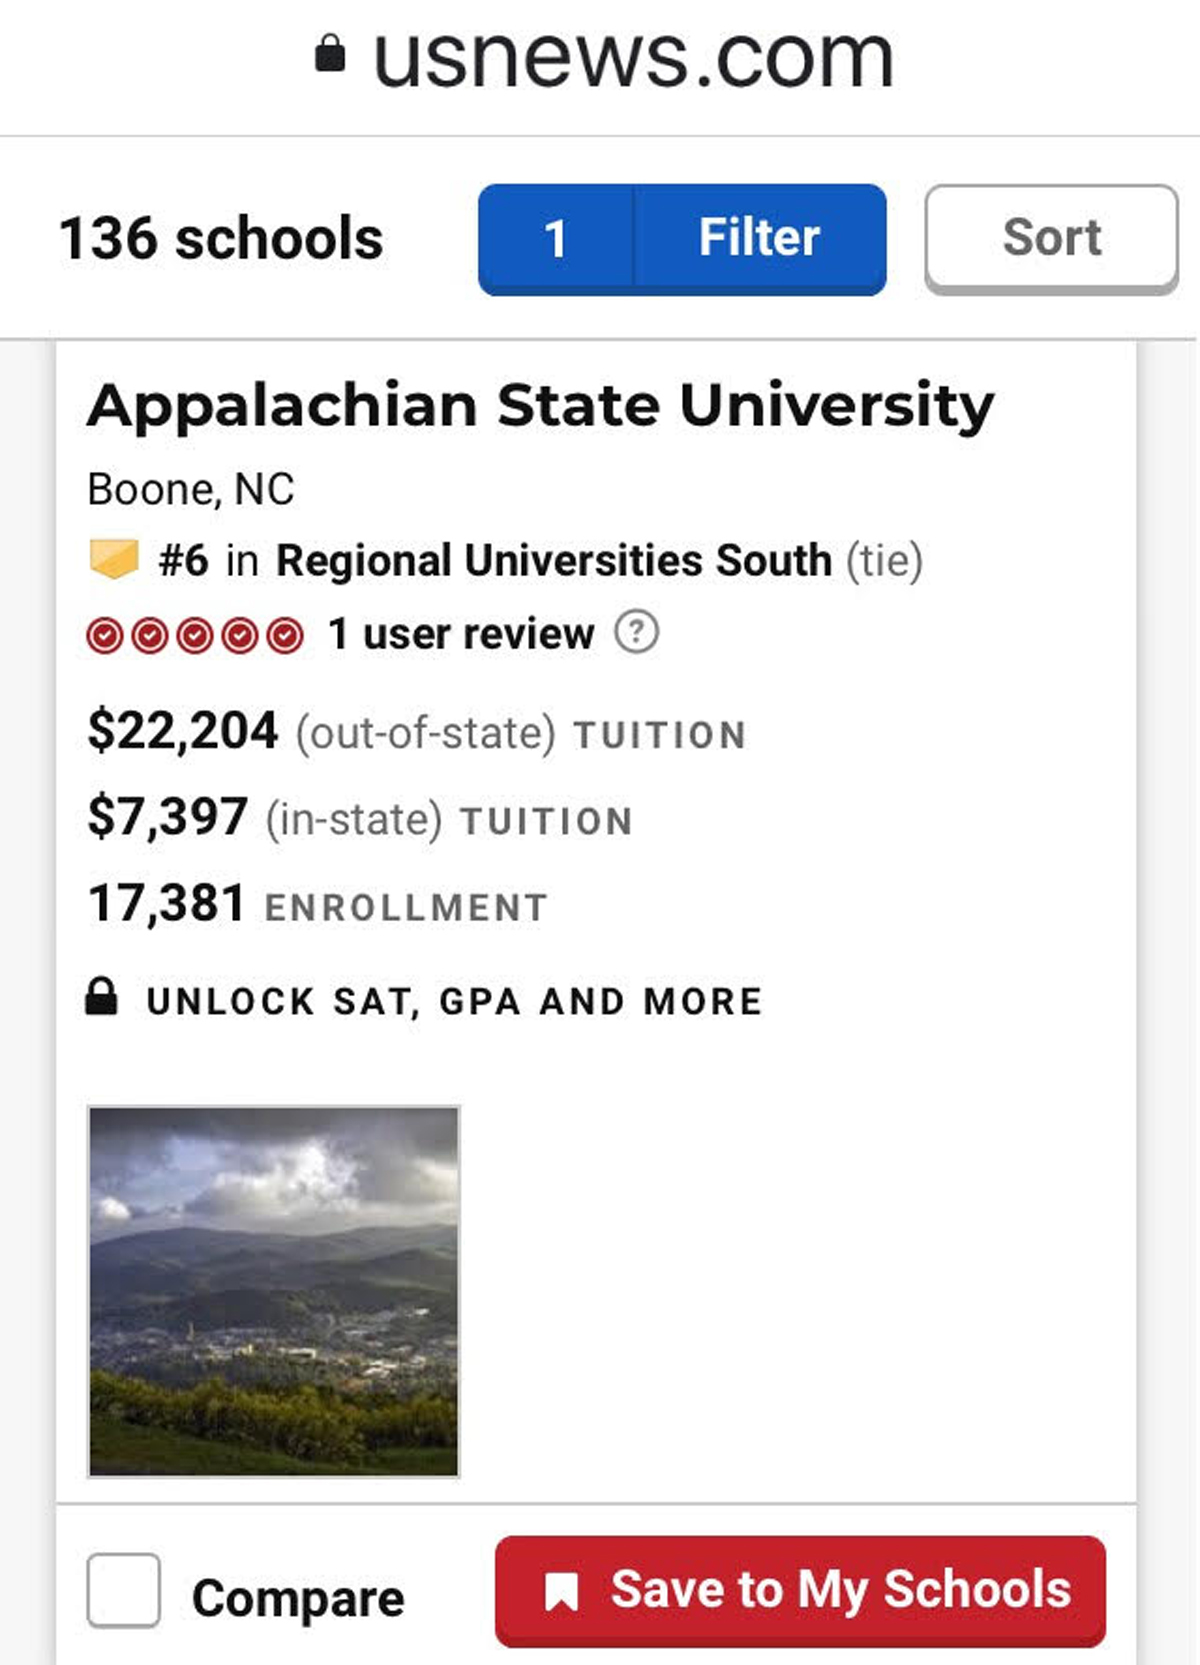 Bảng xếp hạng của ĐH Appalachian State theo US.News 2020 https://www.usnews.com/best-colleges/rankings/regional-universities-south